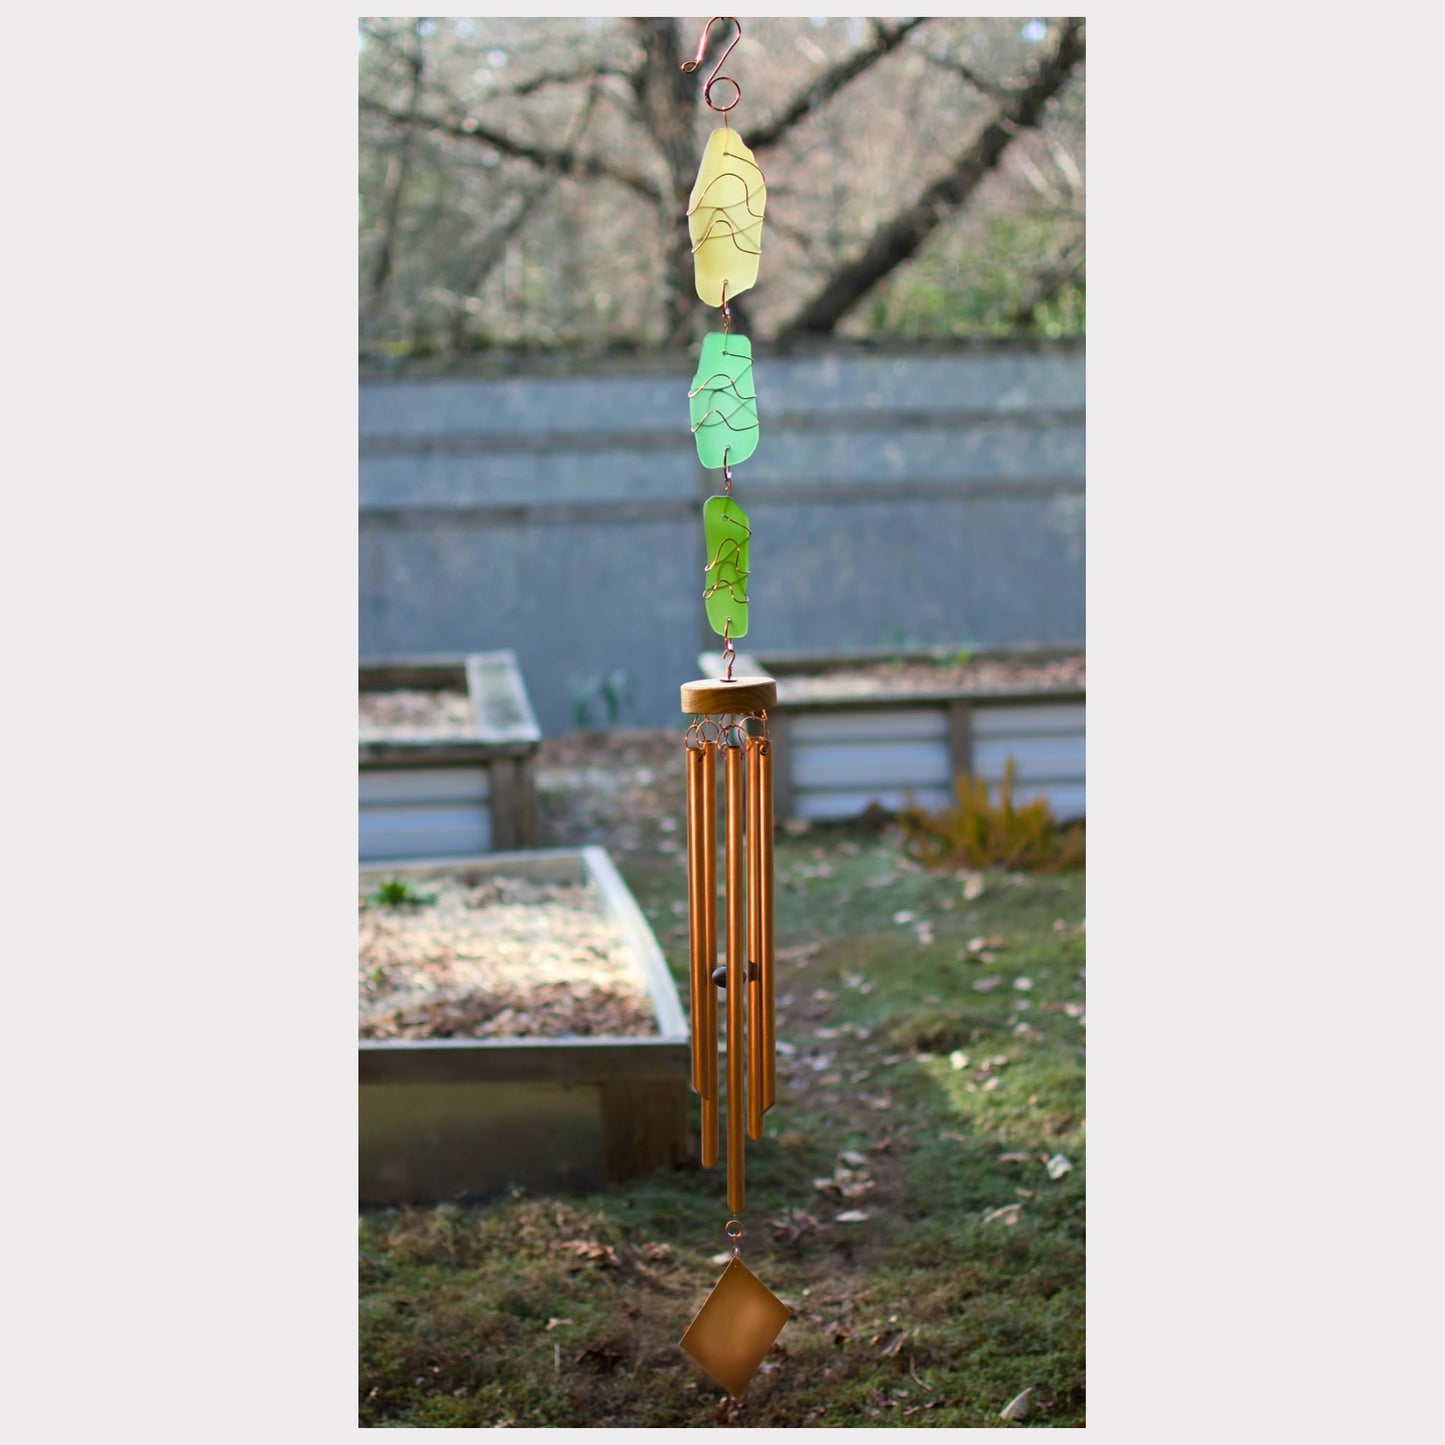 Sea glass large handcrafted wind chime with copper chimes.